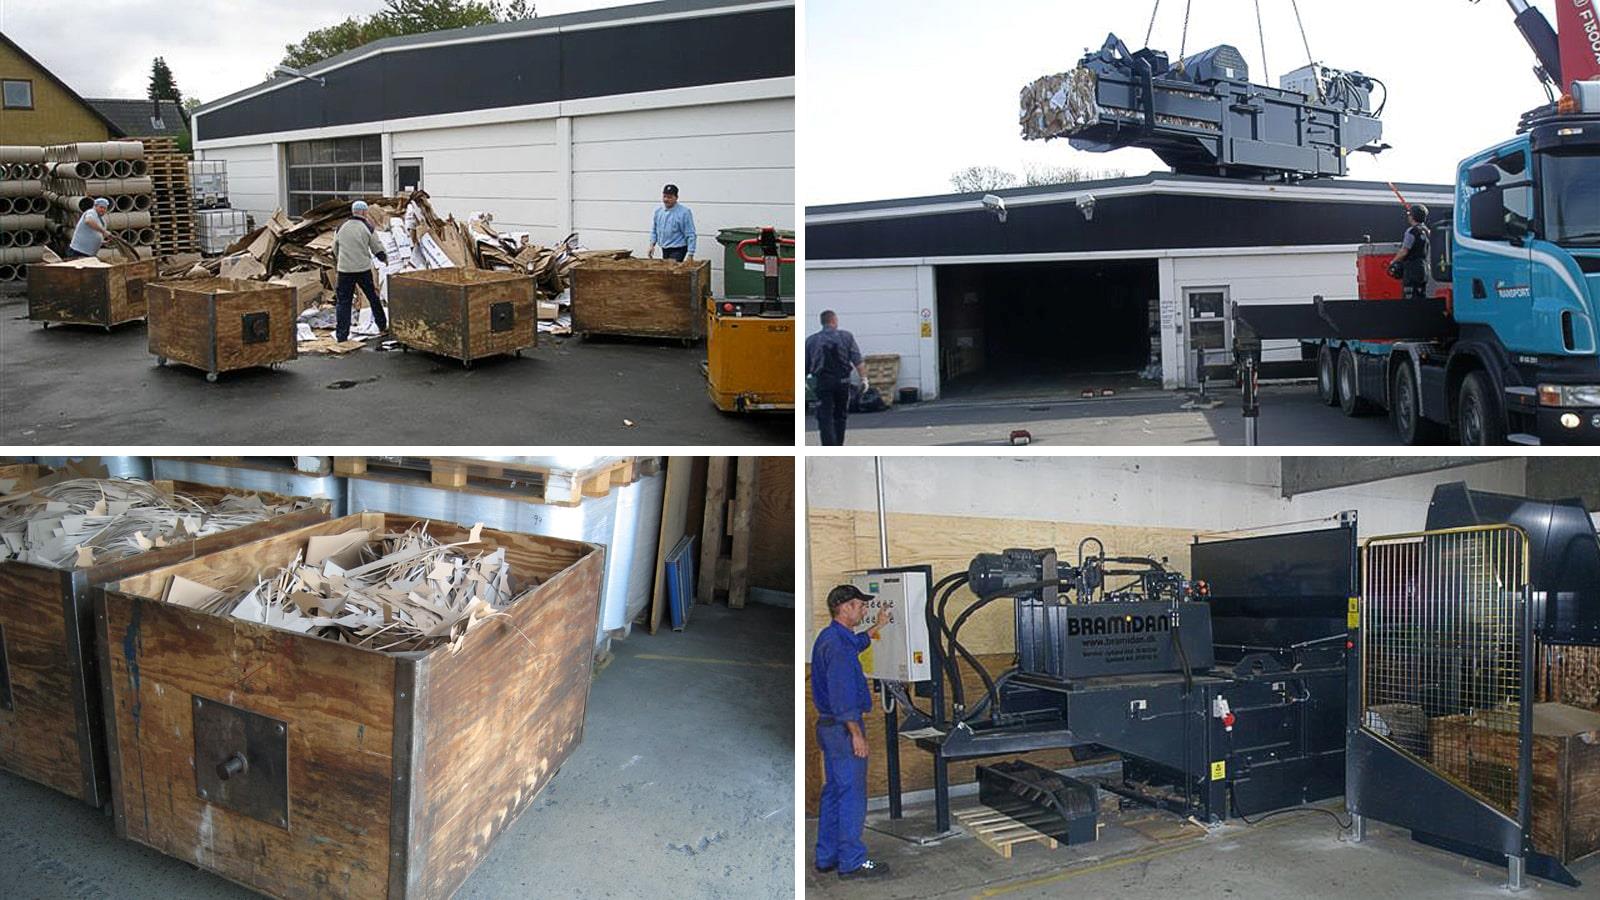 Collage of horizontal baler and cut cardboard waste in wooden boxes